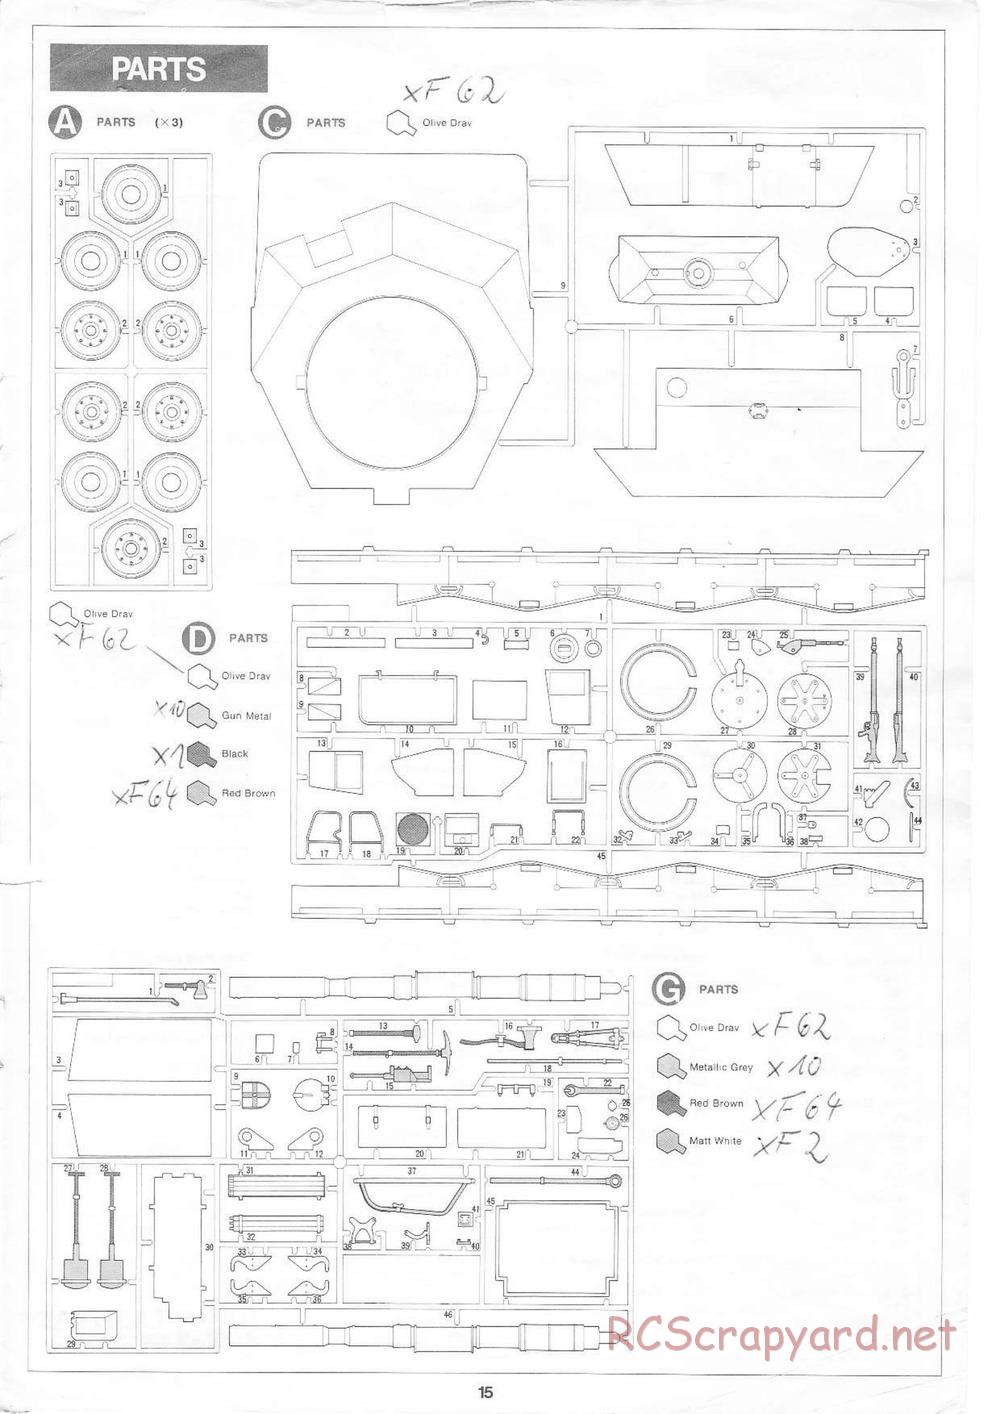 Tamiya - Leopard A4 - 1/16 Scale Chassis - Manual - Page 15